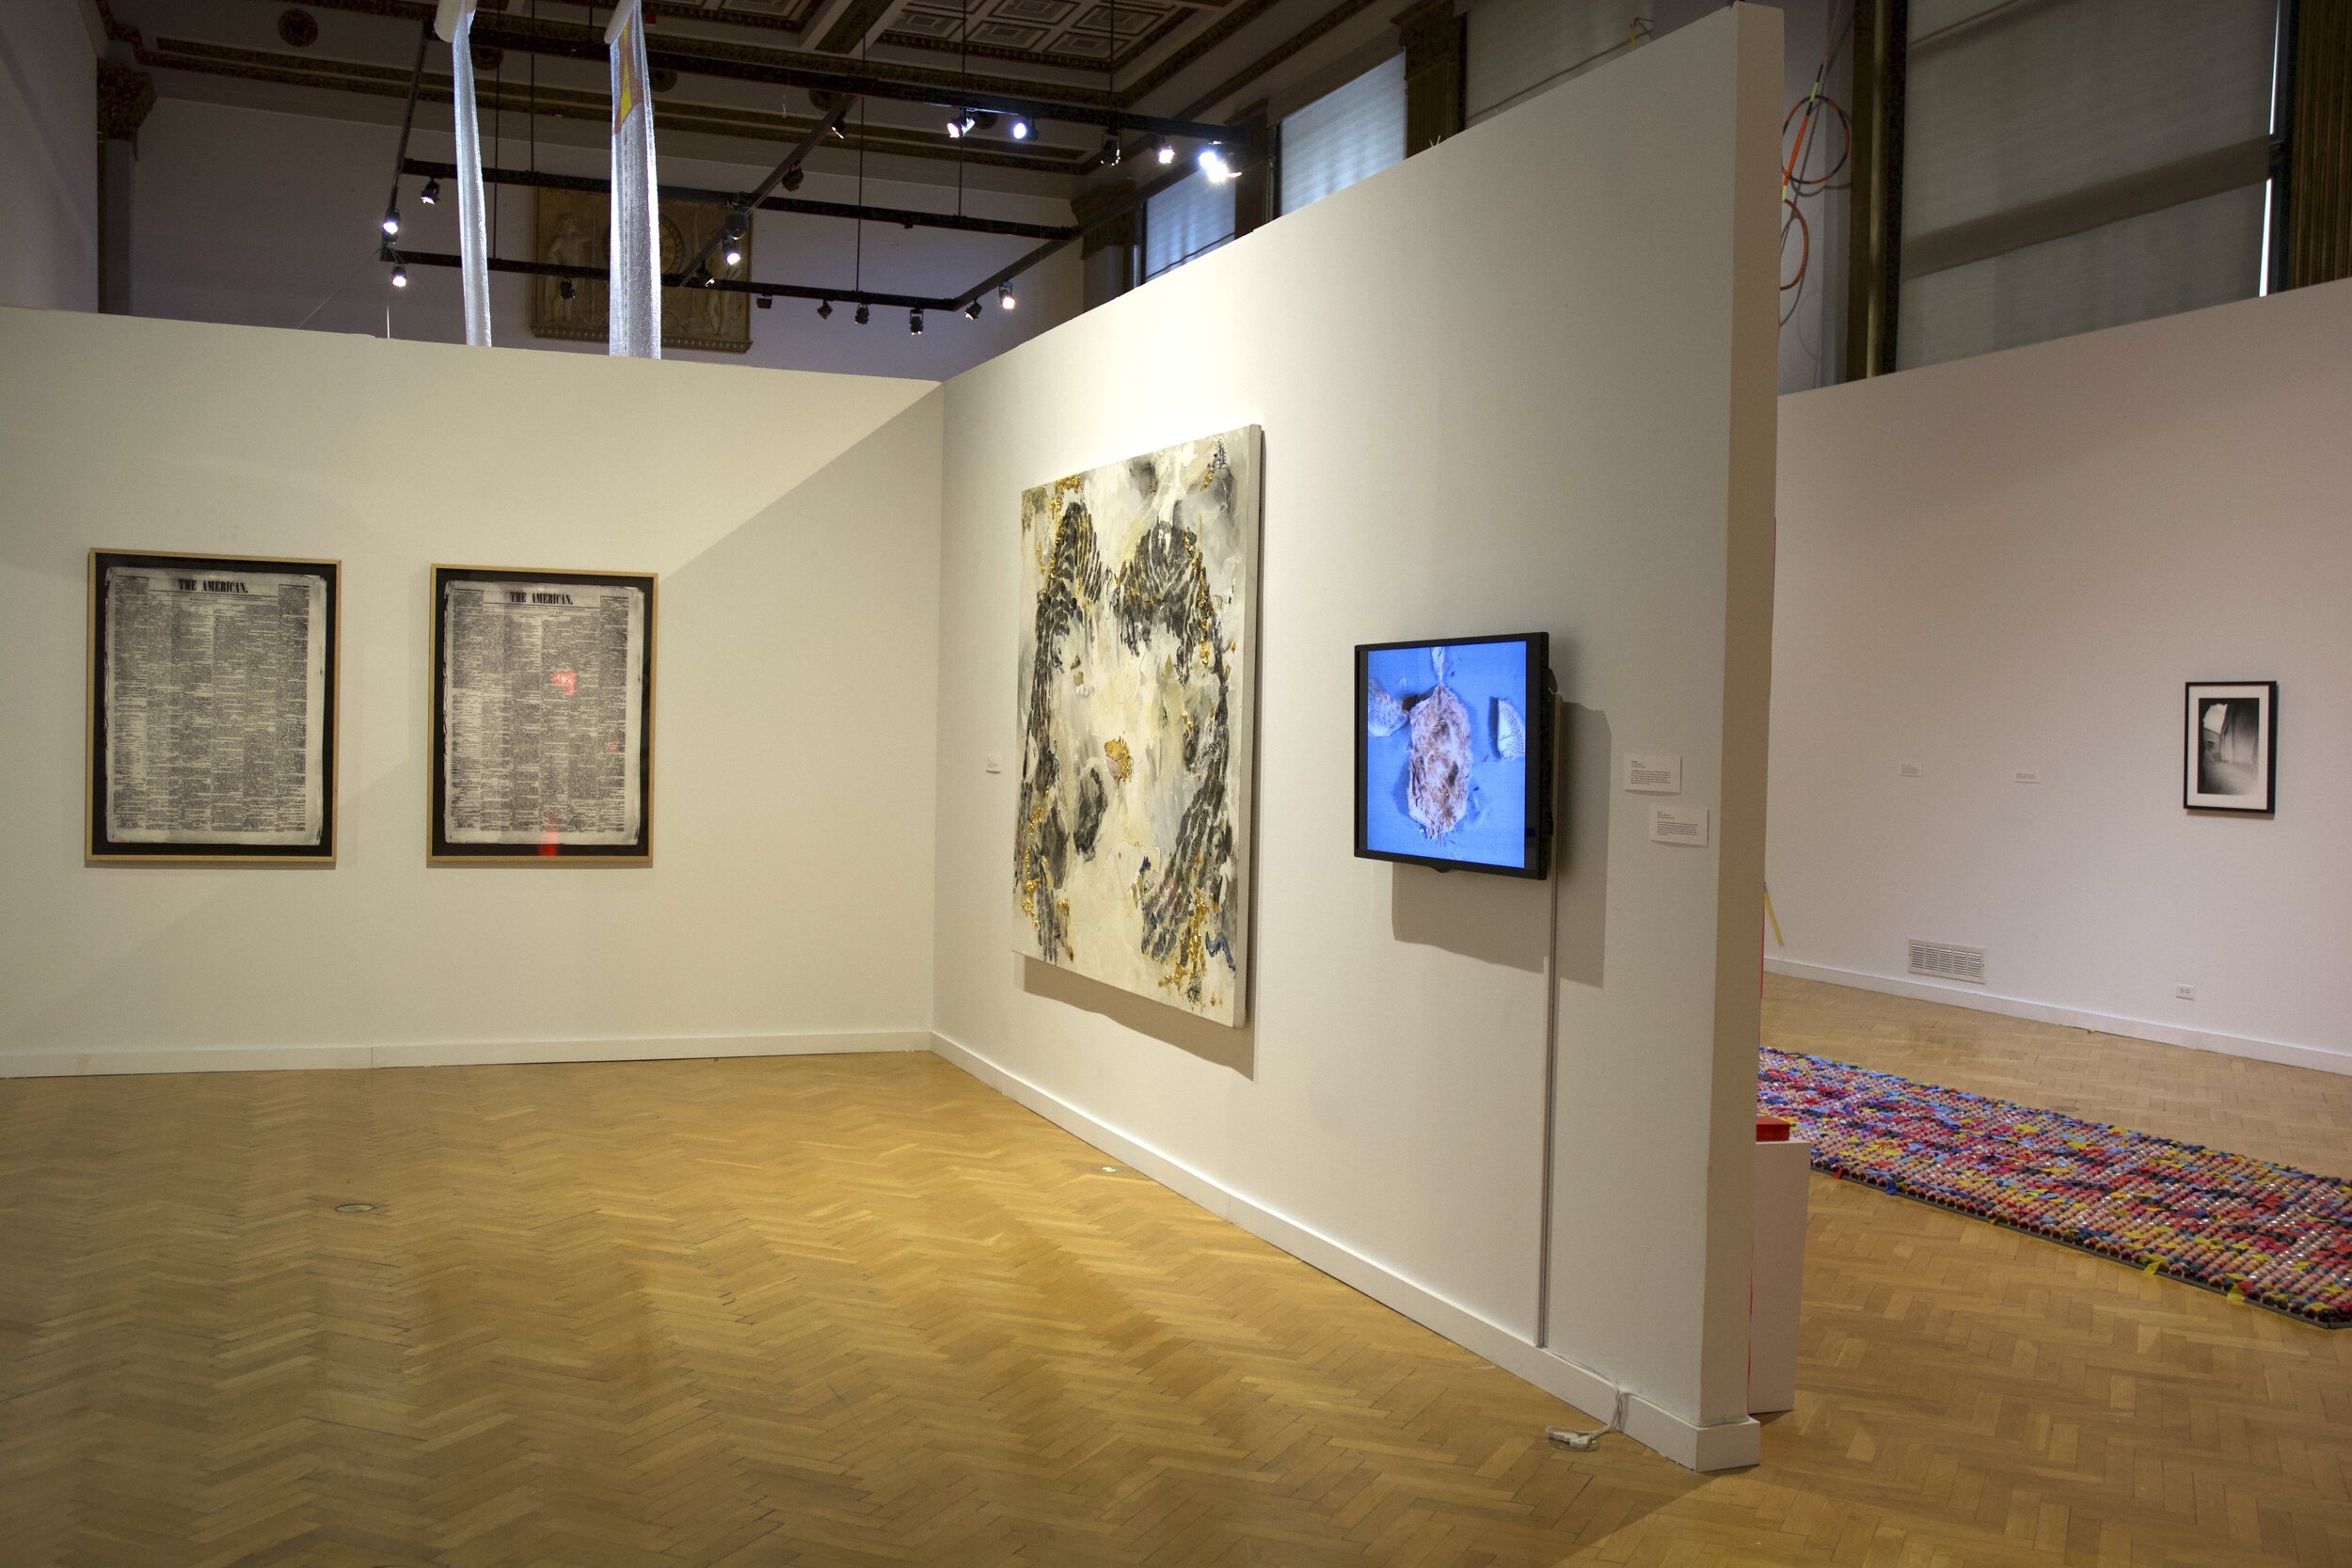  Installation view of works, left to right: Julietta Cheung, Sherwin Ovid, and Emilio Rojas, Óscar I González Díaz, and Kioto Aoki. 